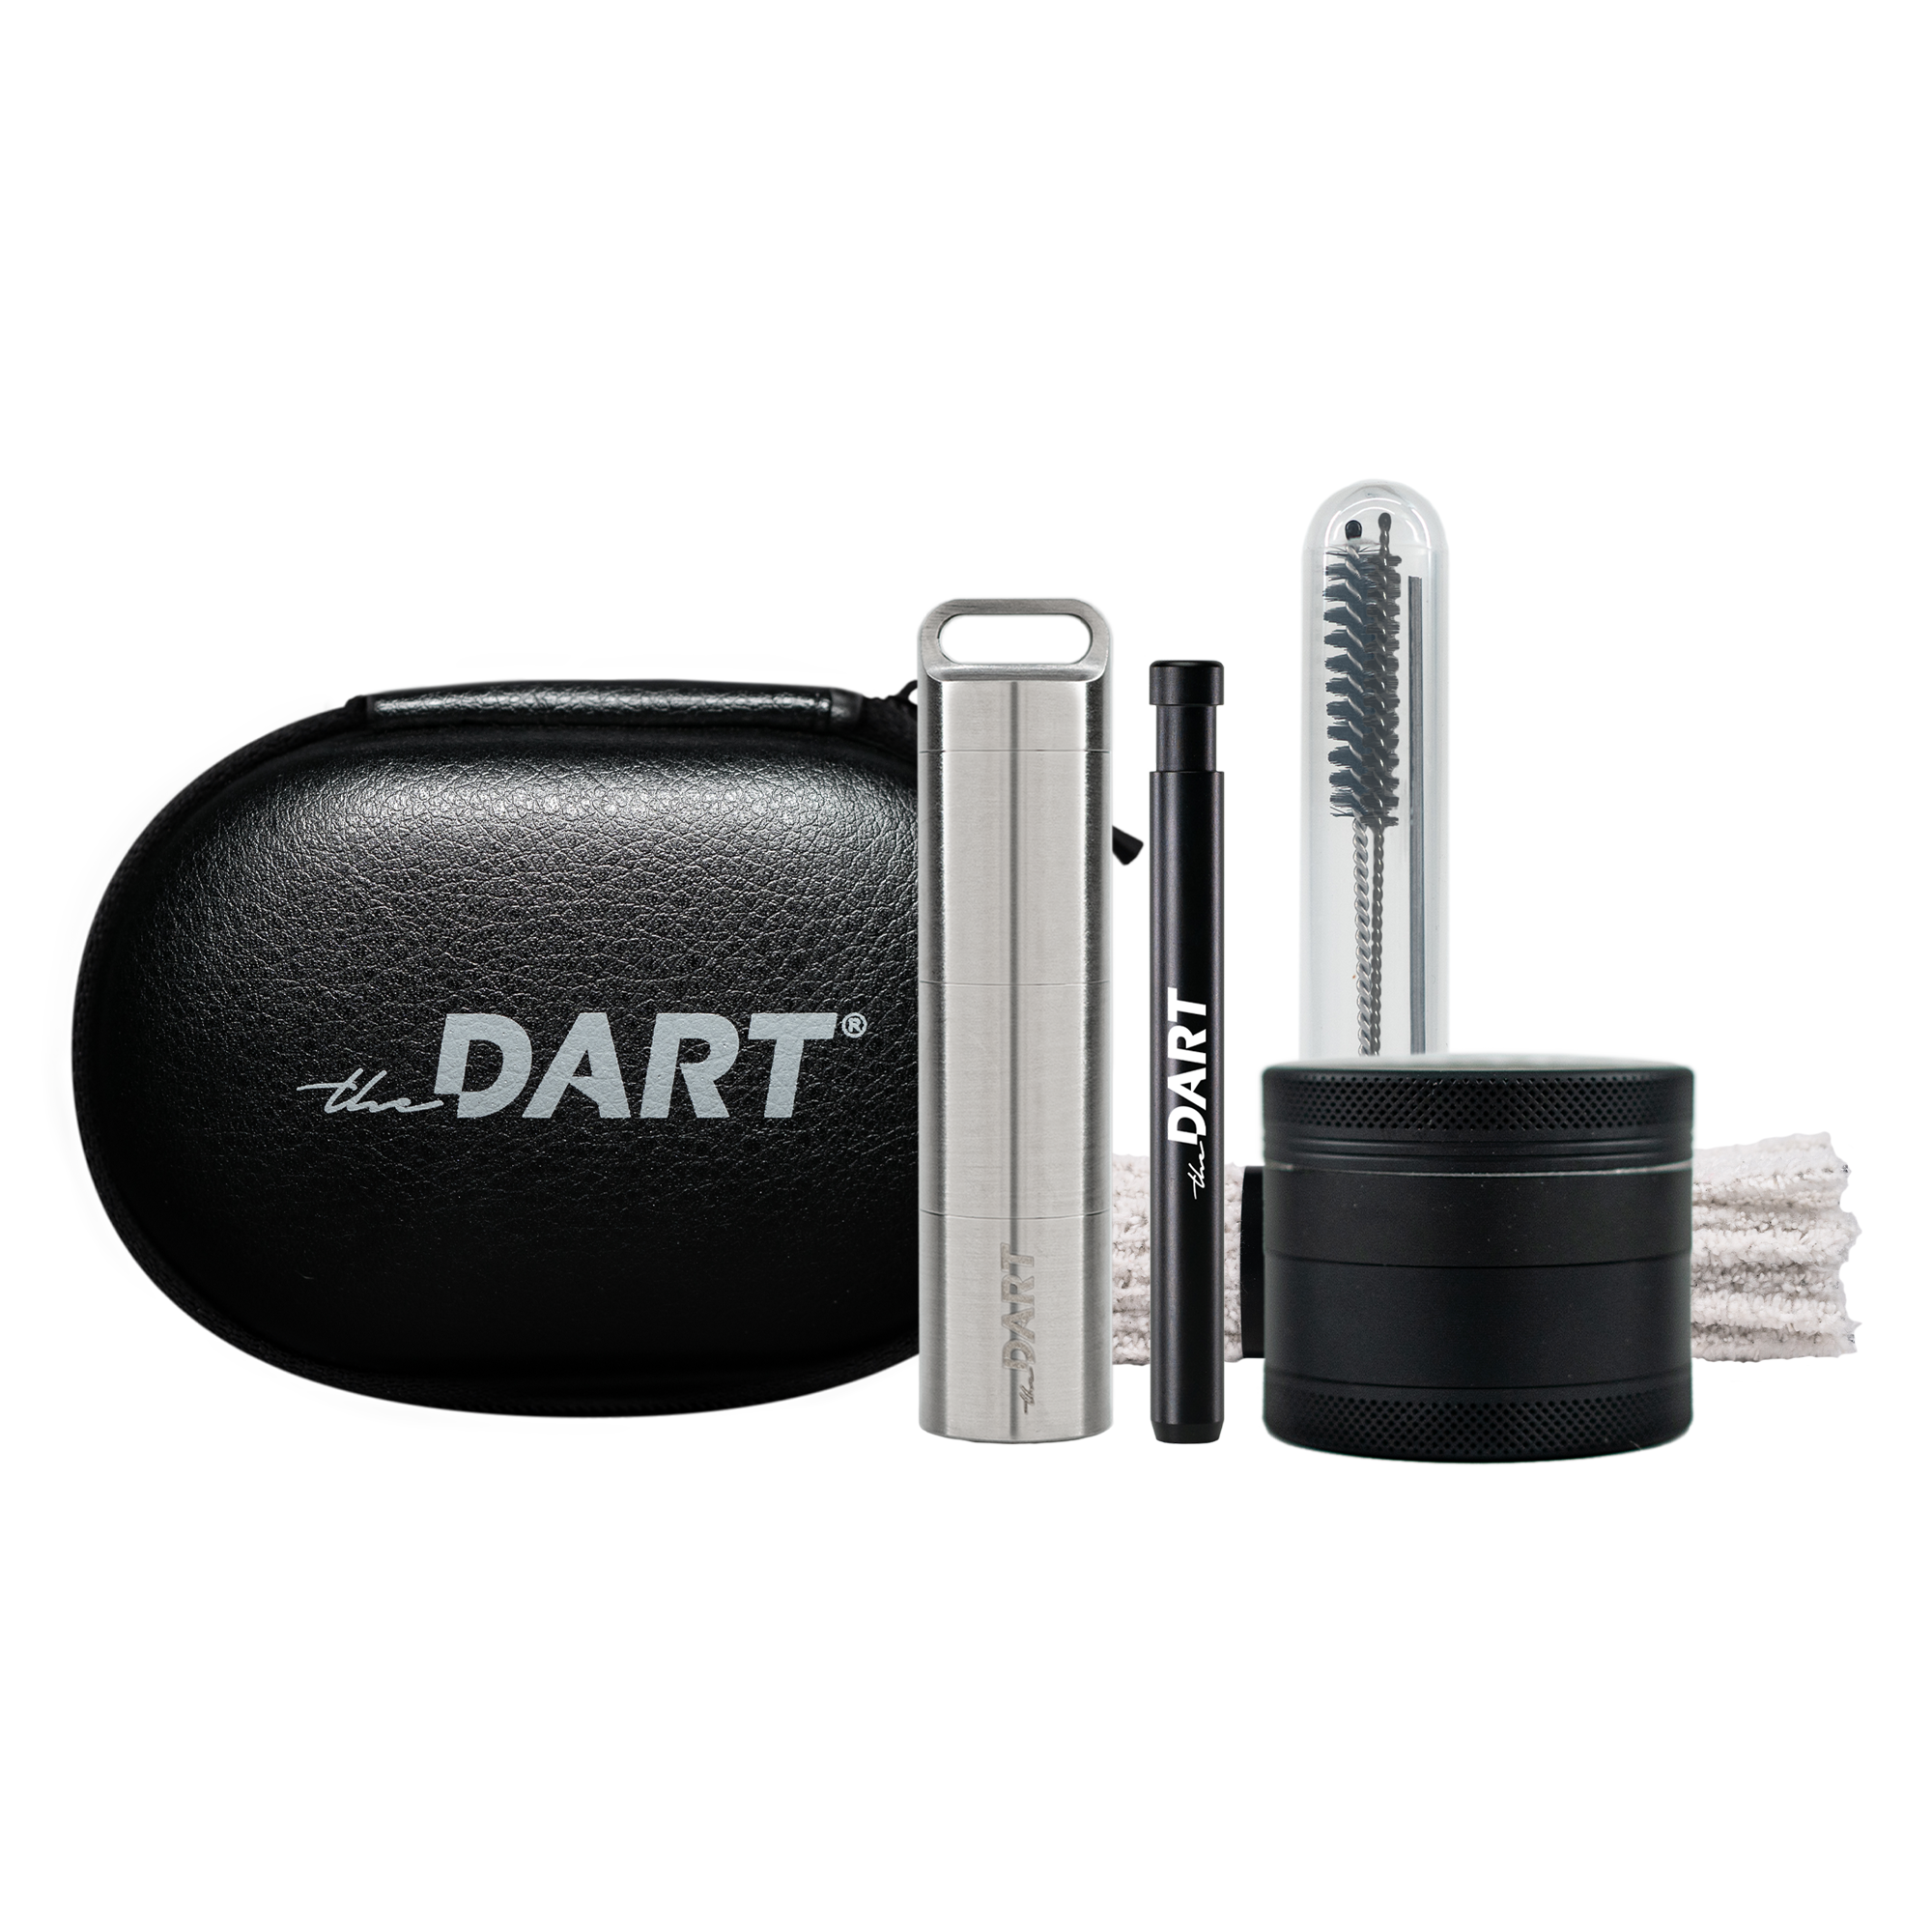 Cleaning Kit – The DART Company